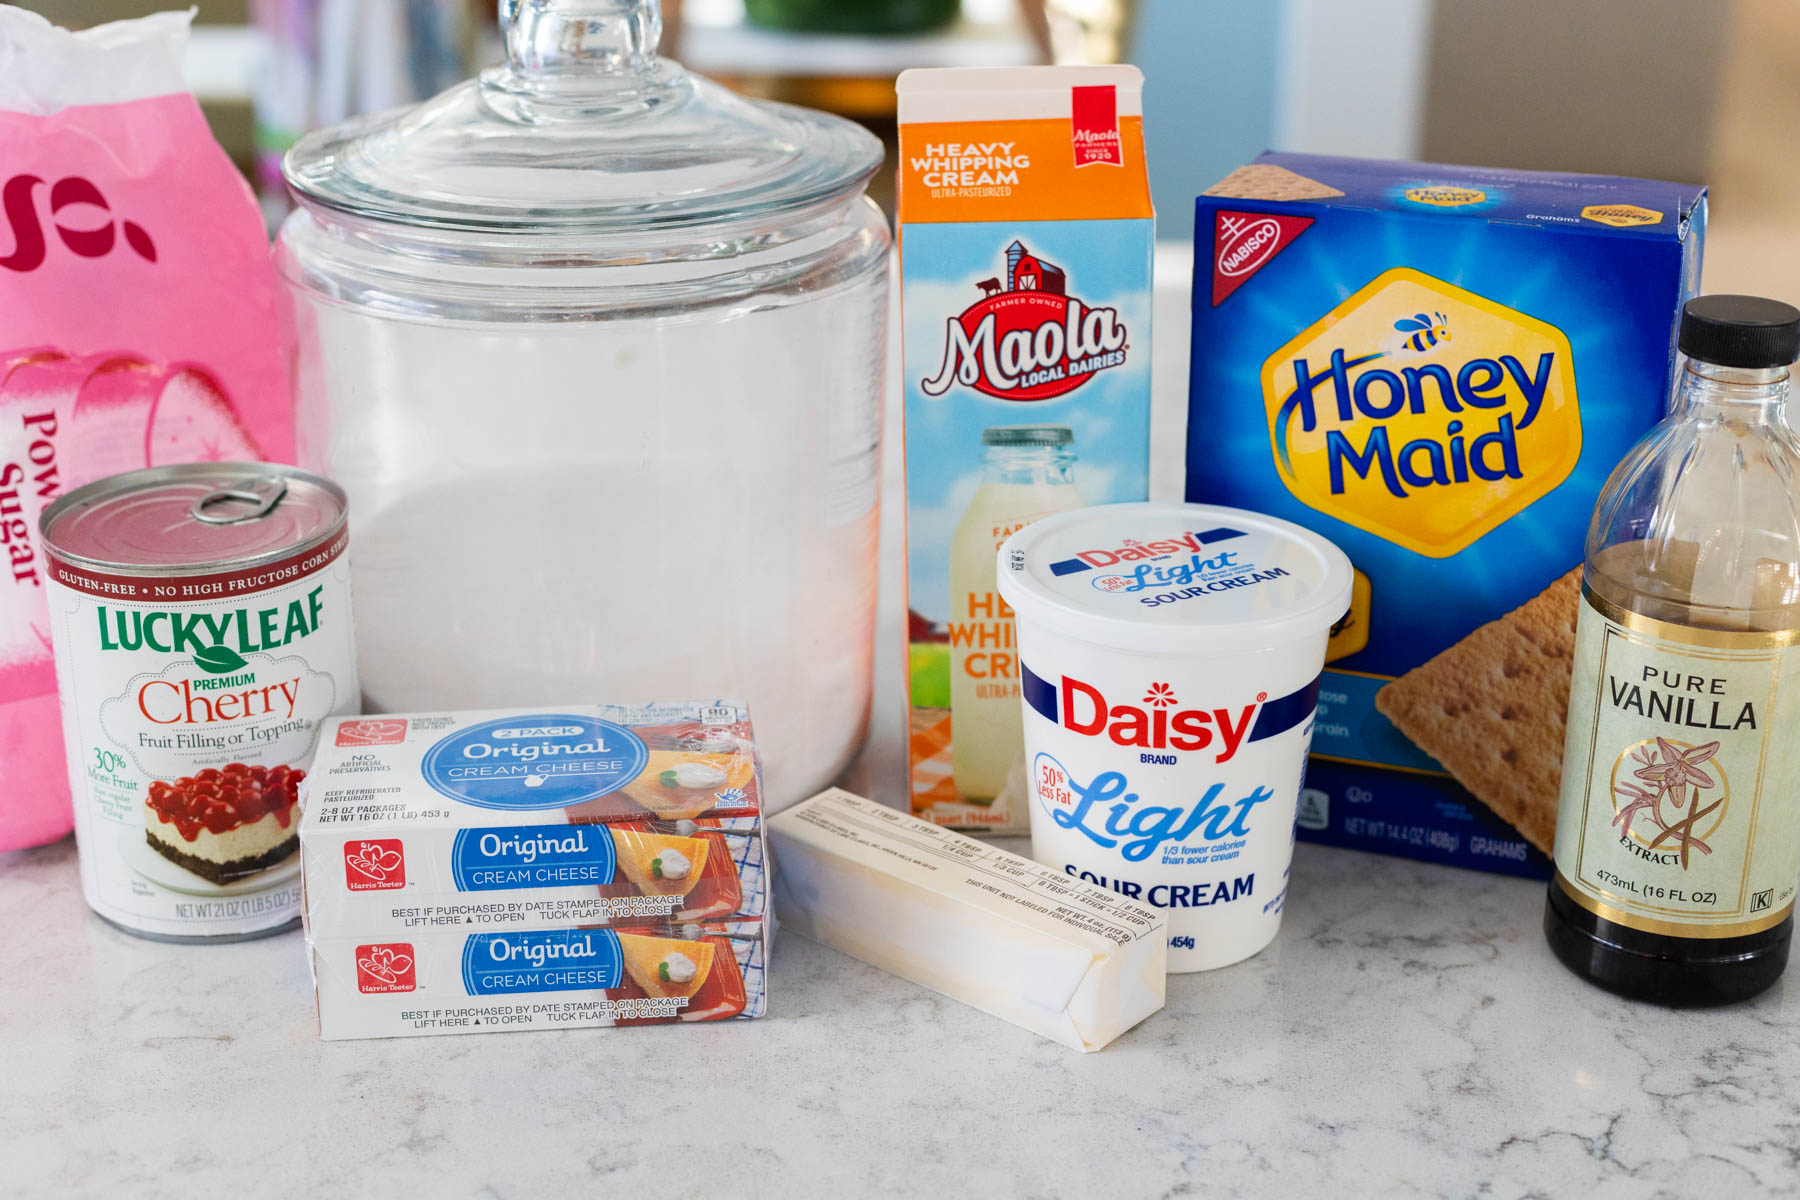 The ingredients to make a homemade cherry delight dessert are on the kitchen counter.